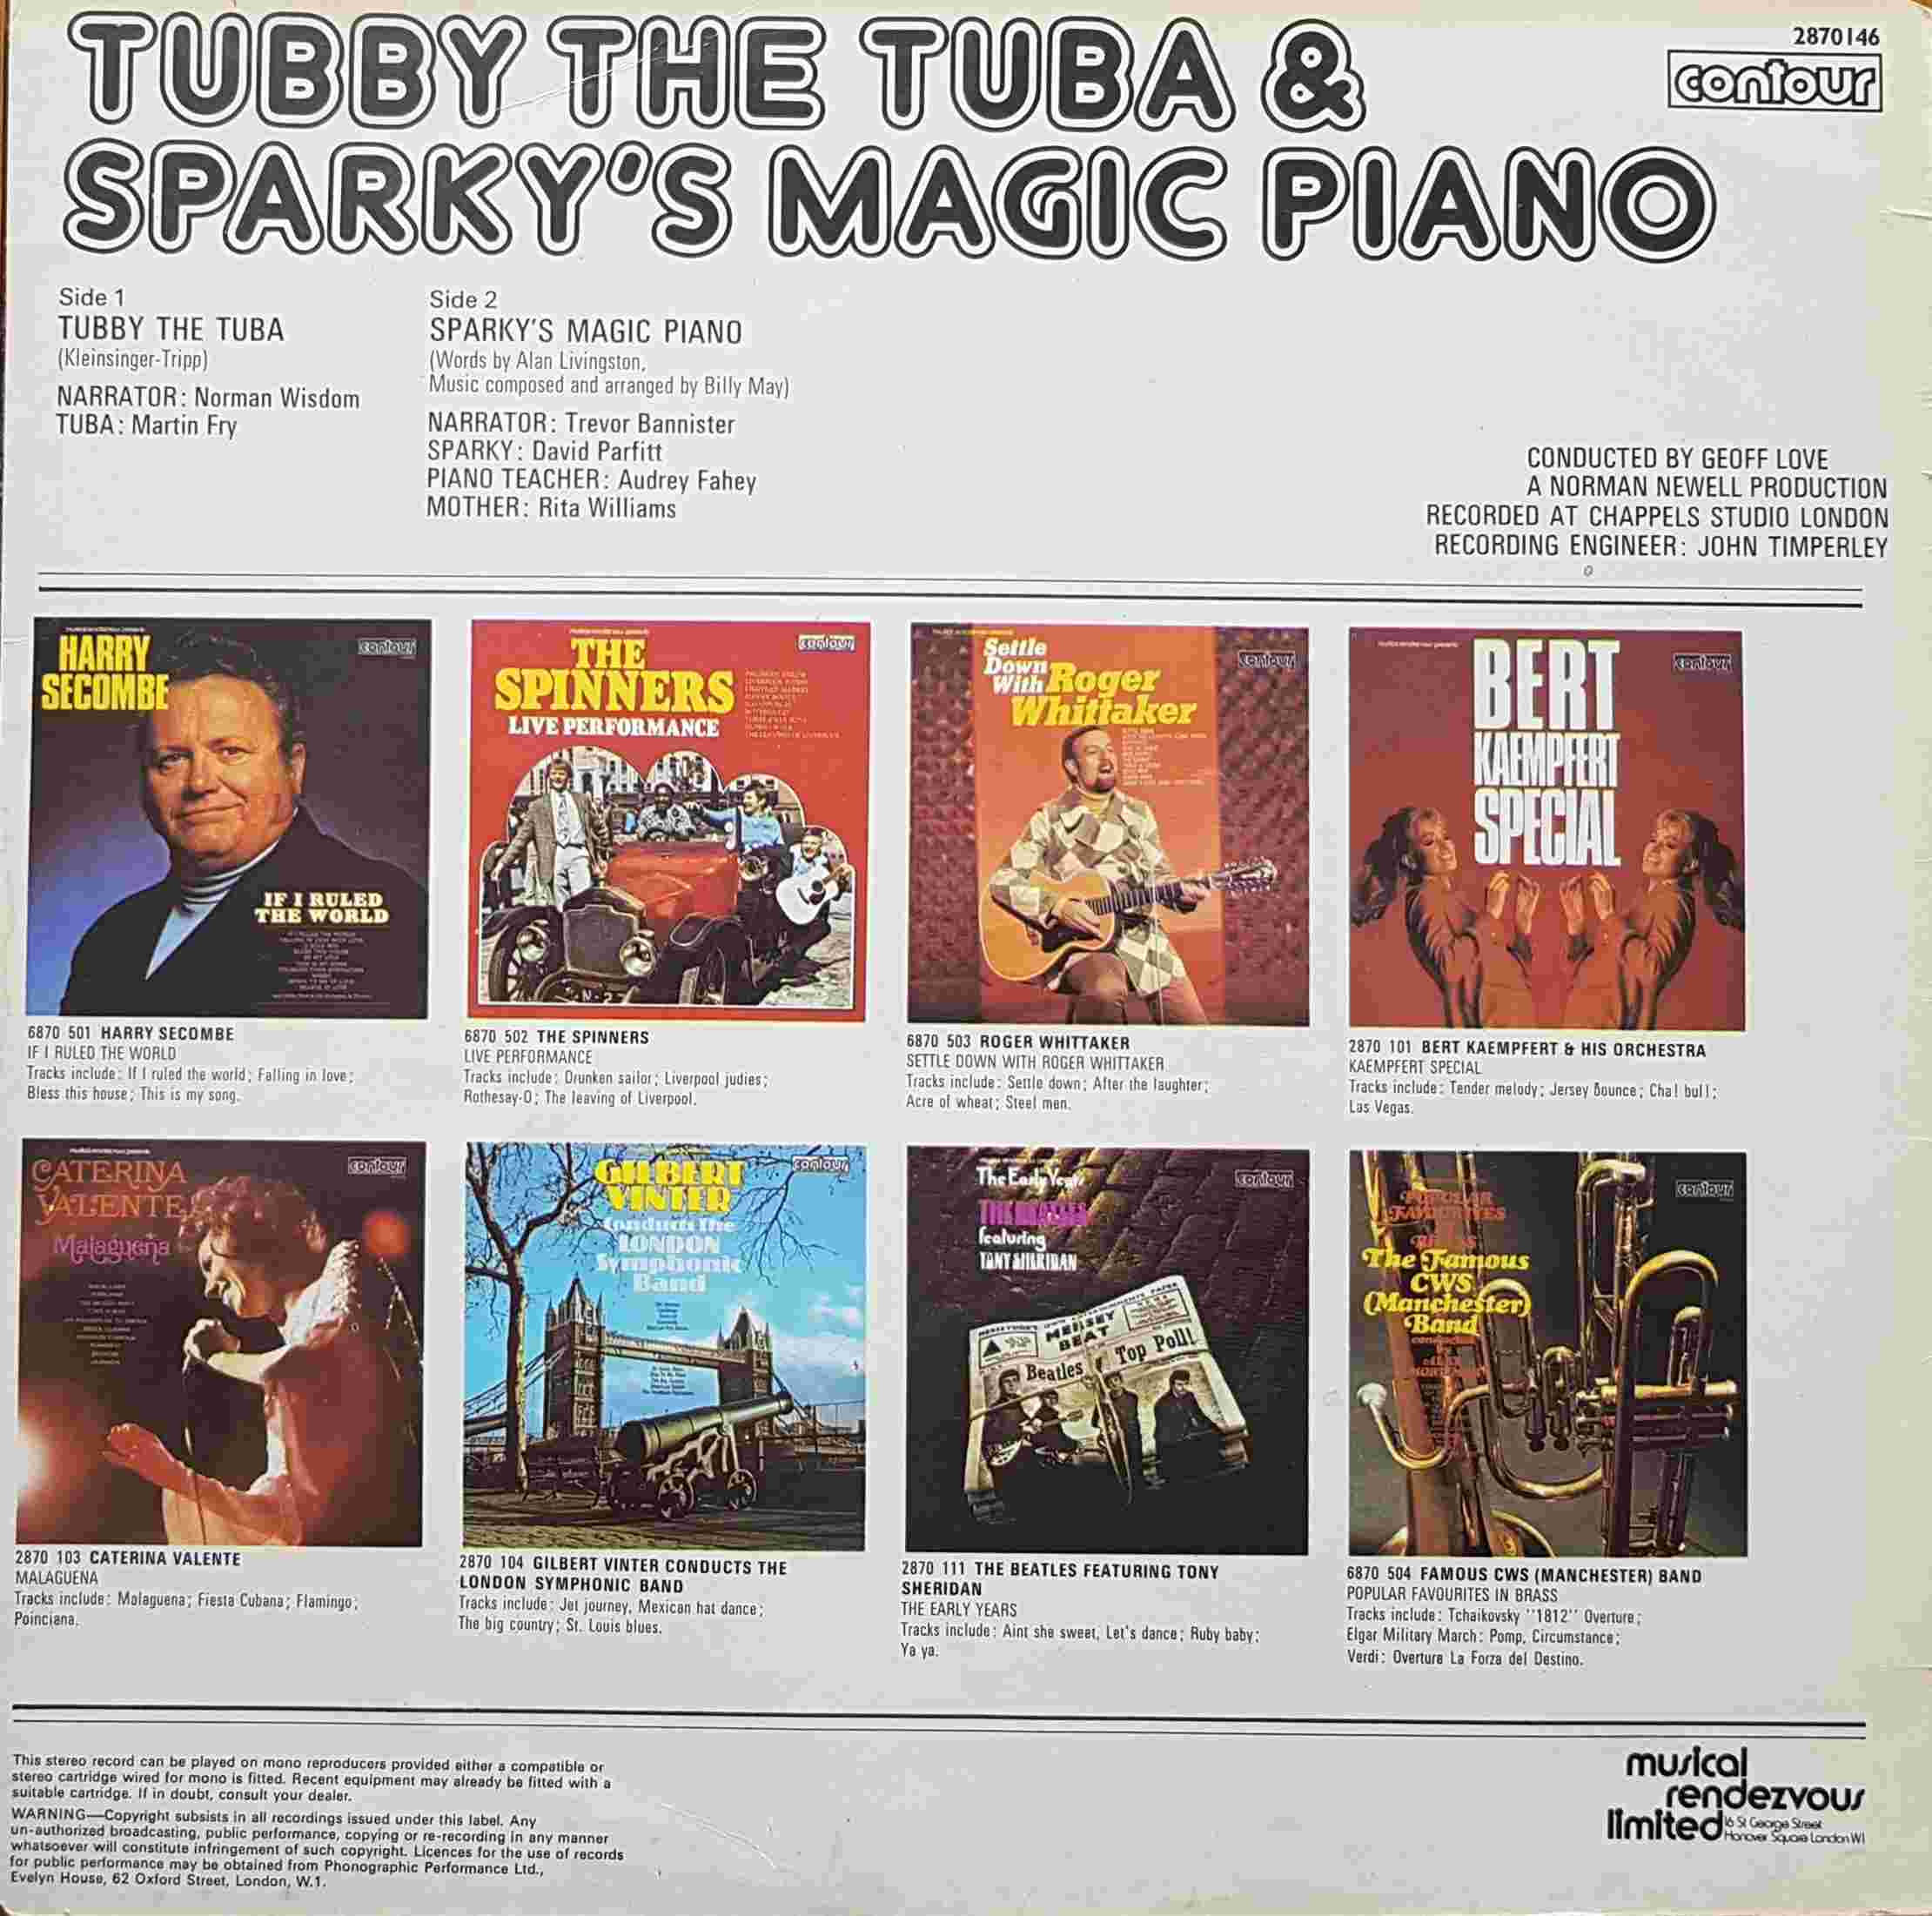 Picture of C 2870146 Tubby the tuba & Sparky's magic piano by artist Kleinsinger-Tripp / Alan Livingston from ITV, Channel 4 and Channel 5 library